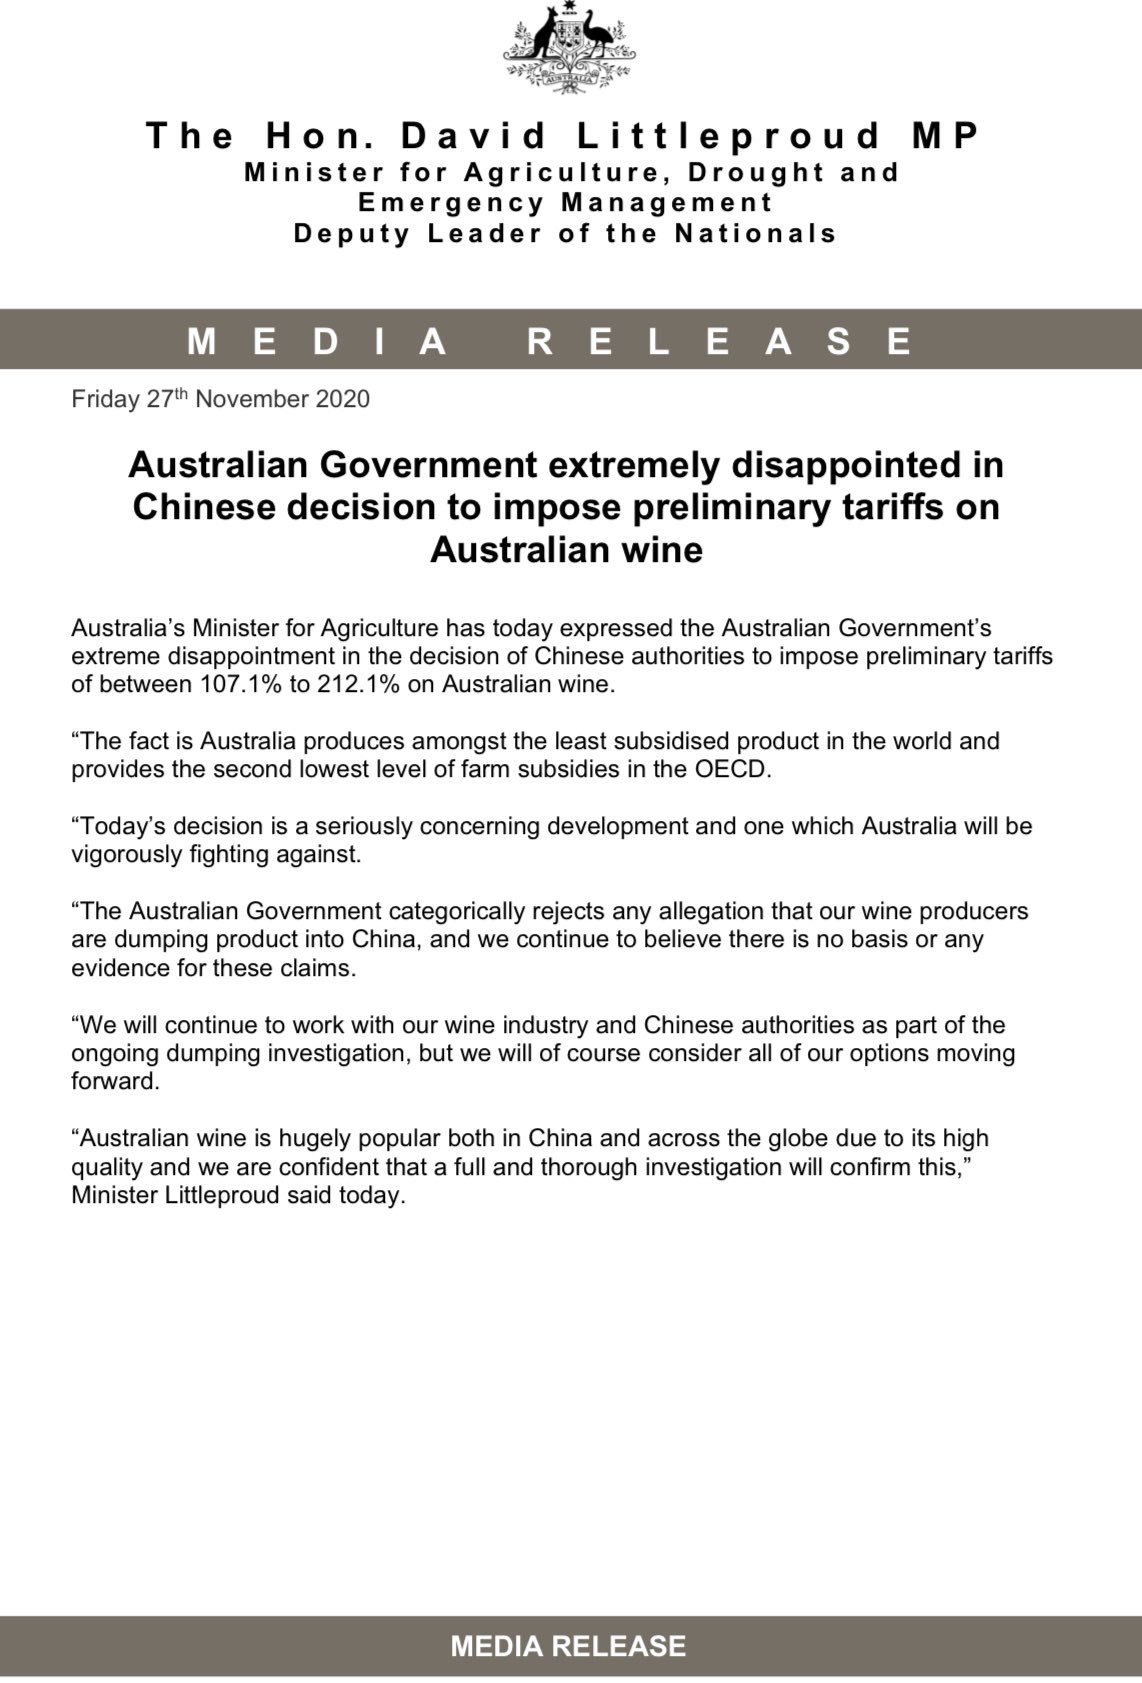 David Littleproud Mp Media Release Australian Government Extremely Disappointed In Chinese Decision To Impose Preliminary Tariffs On Australian Wine Auspol Ausag Australianwine T Co Xk6jechg Twitter